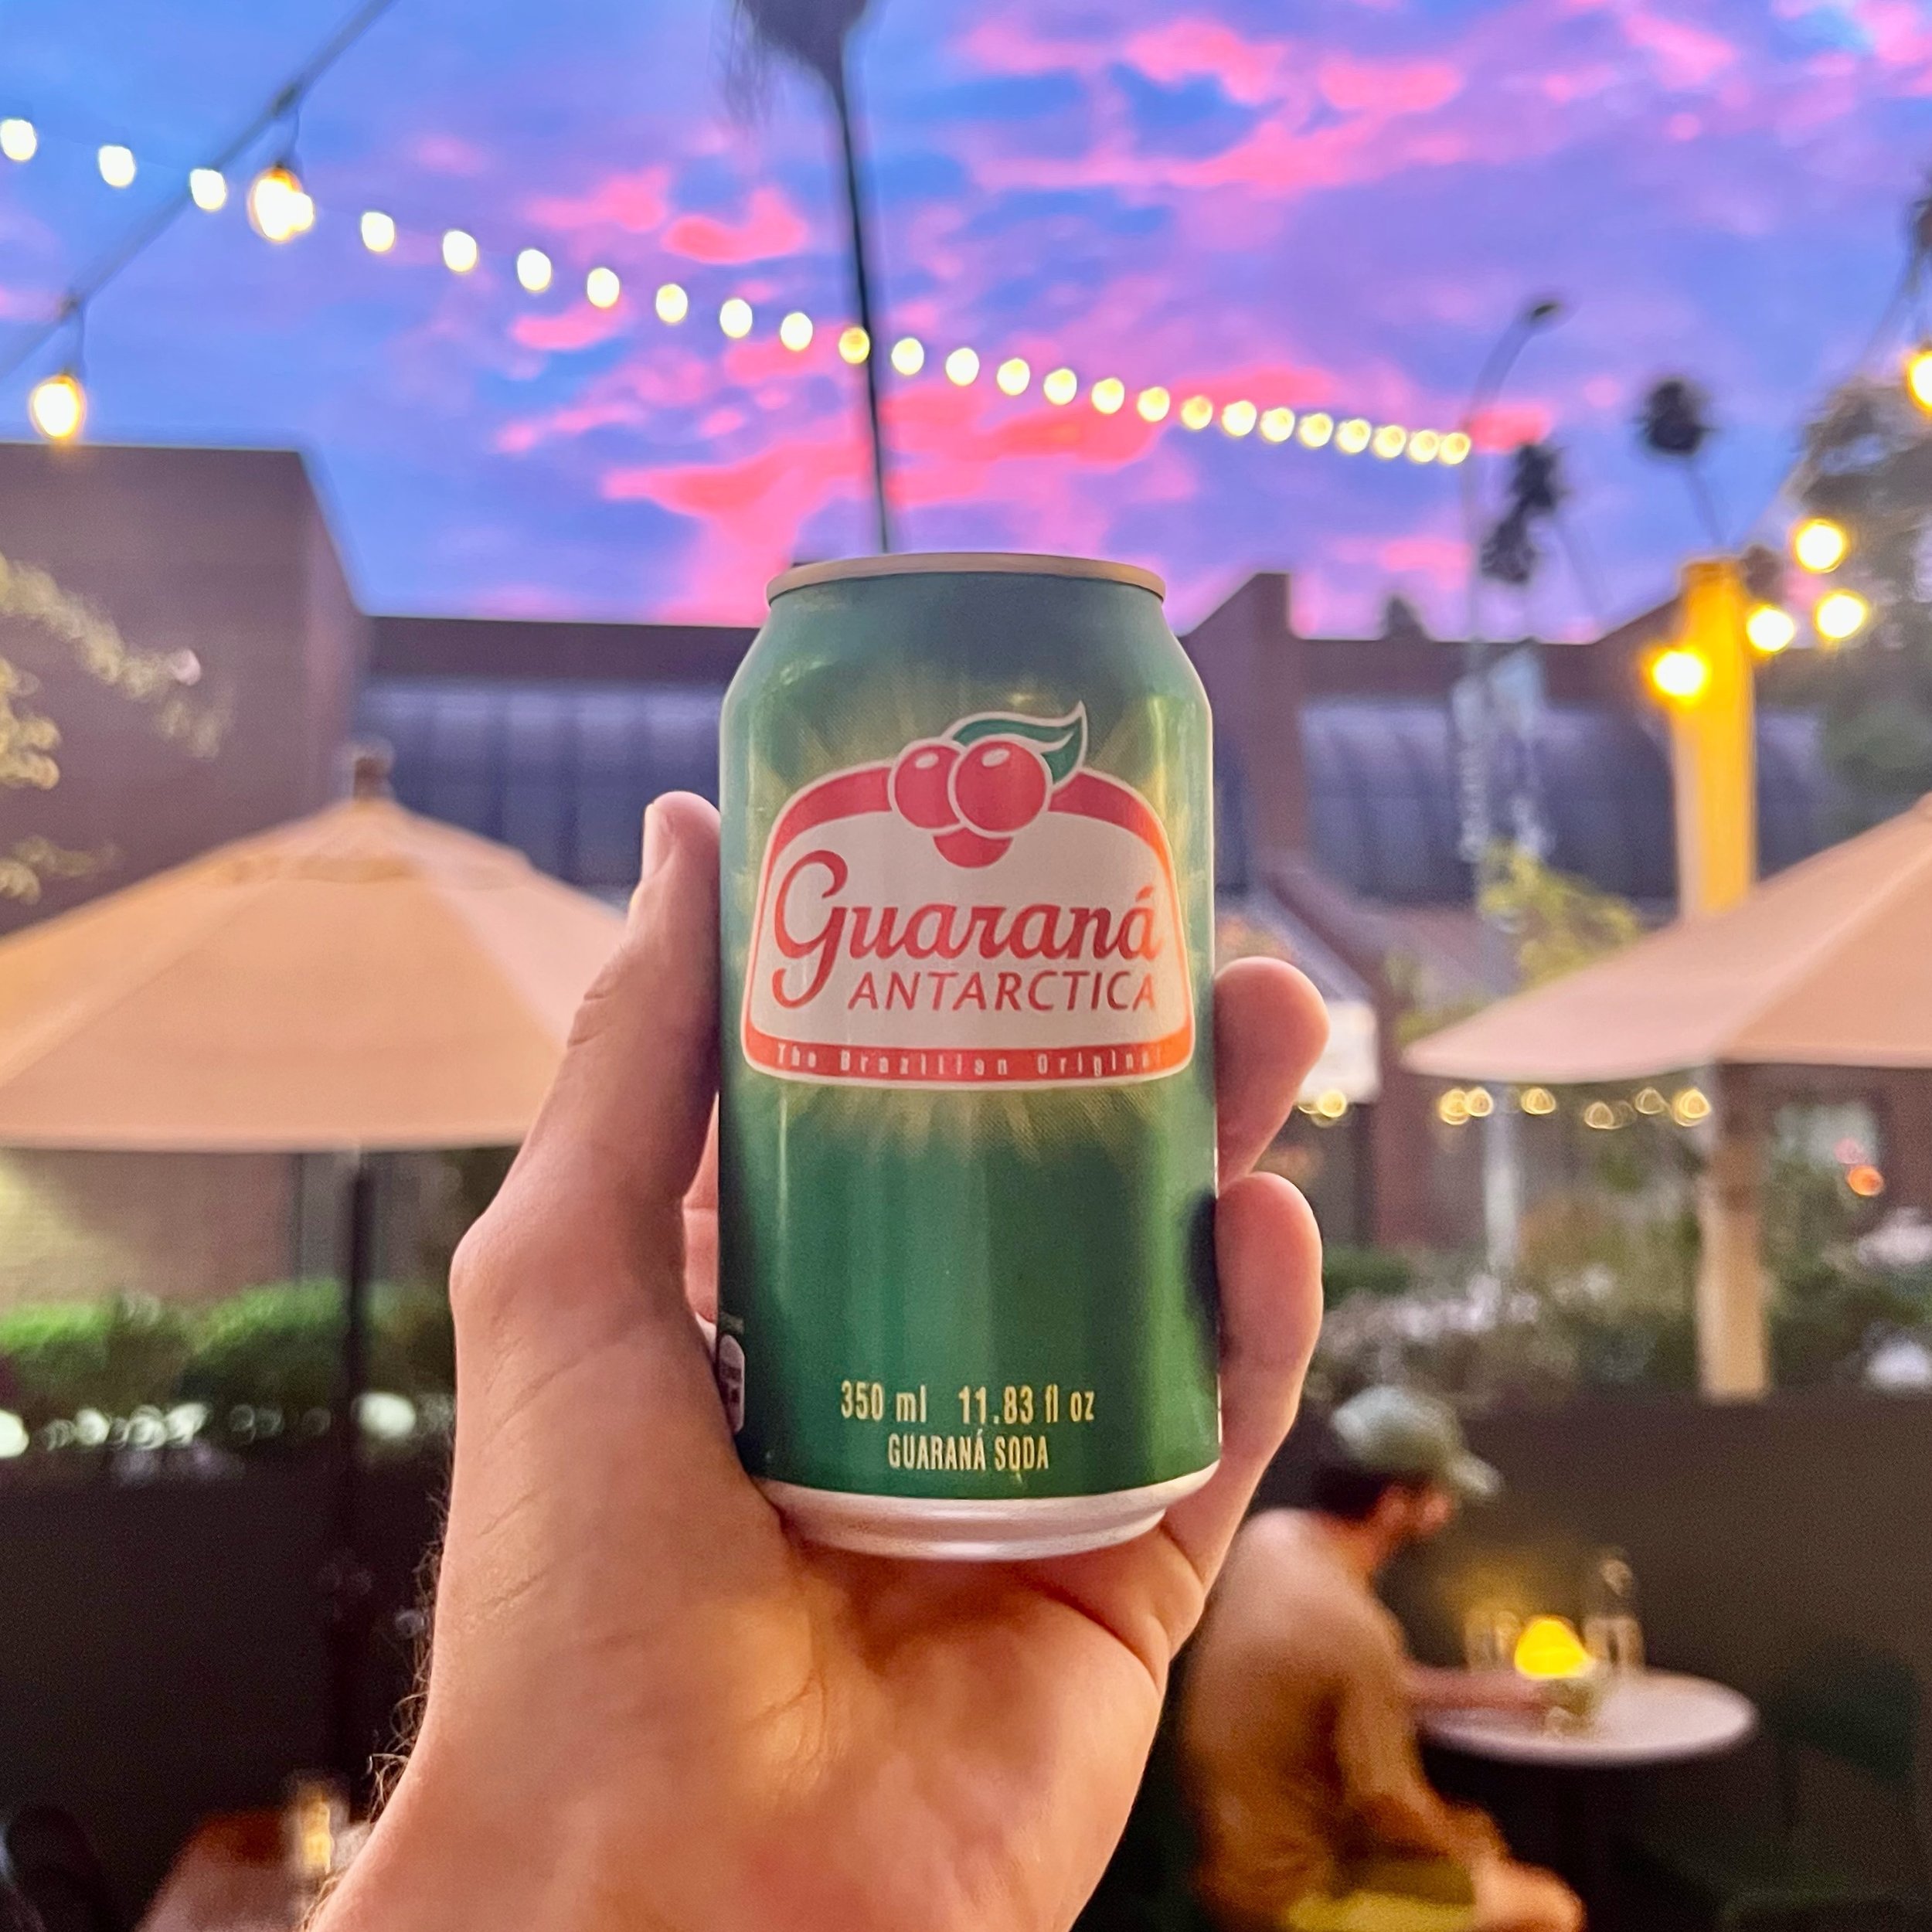 Guarana Antarctica, one of our N/A options, is a sweet and crisp Brazilian fruit soda. It&rsquo;s served daily alongside so many other flavors of Brazil! 🇧🇷 Come check it out! Going until 10pm tonight 🫶🏼🍽️🍹